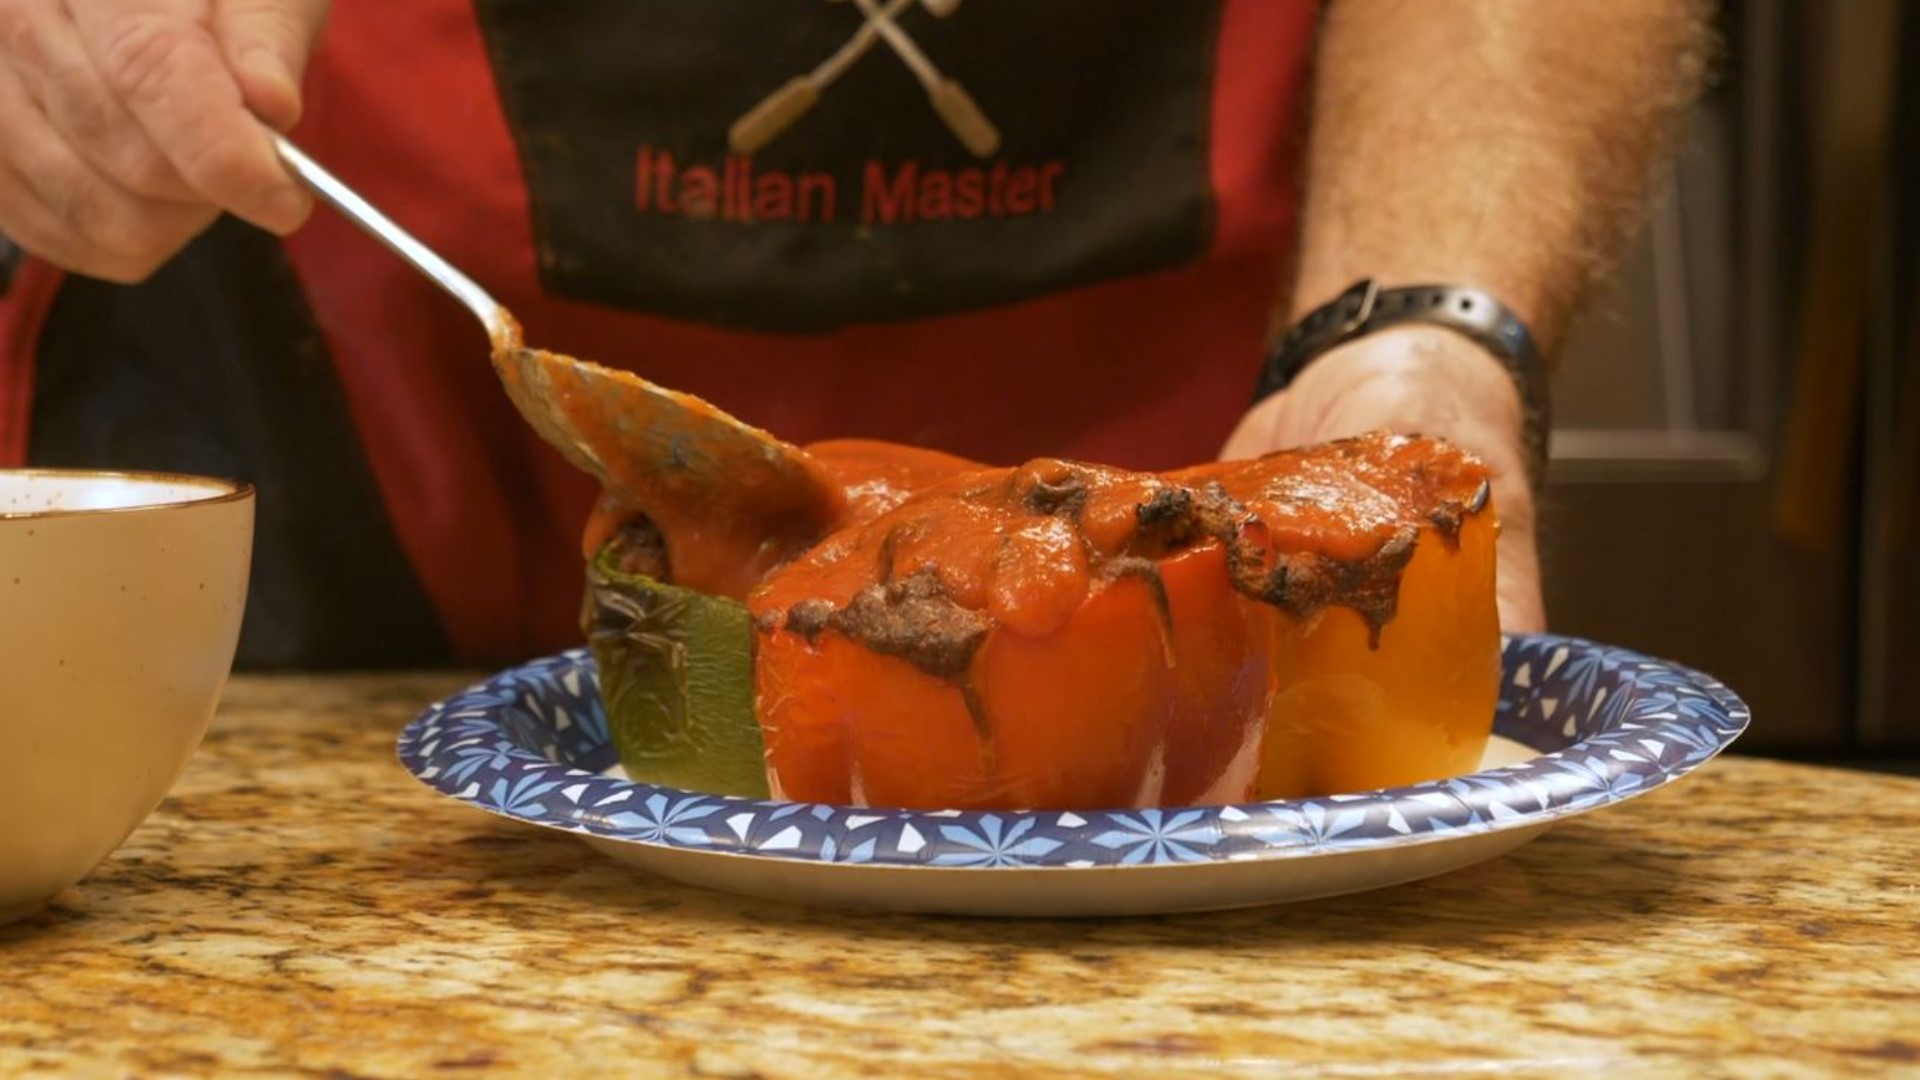 Dom Tiberi shares his recipe for stuffed peppers and how to prepare the dish.